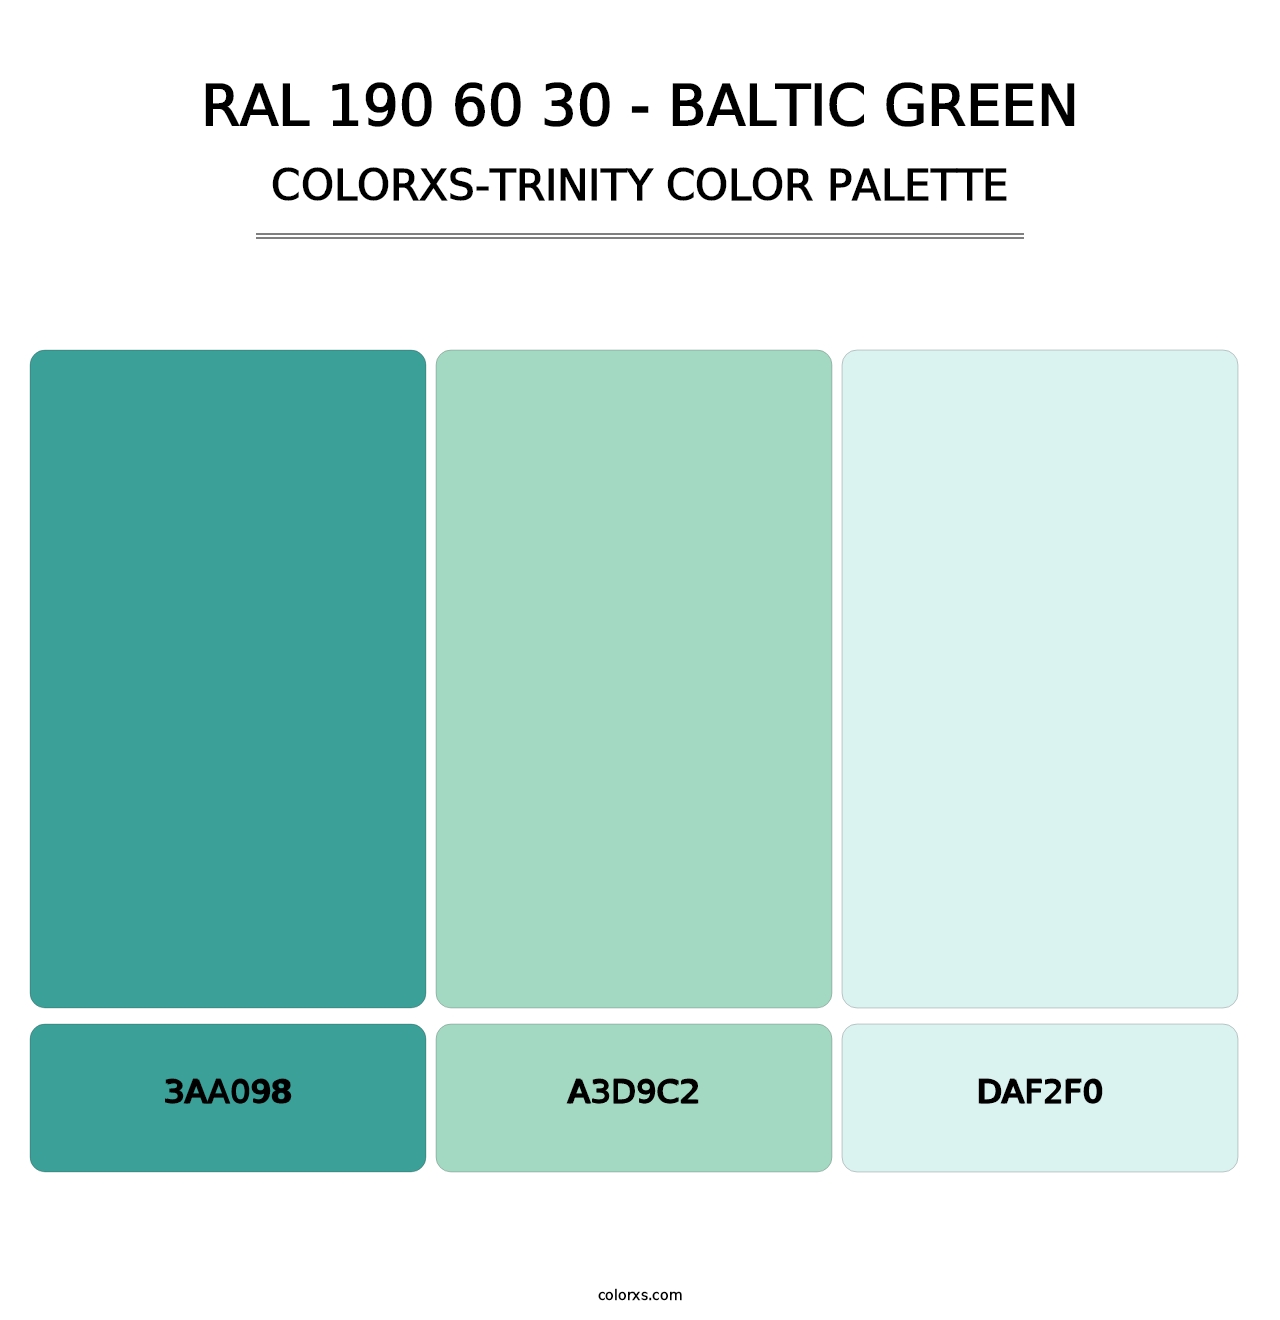 RAL 190 60 30 - Baltic Green - Colorxs Trinity Palette